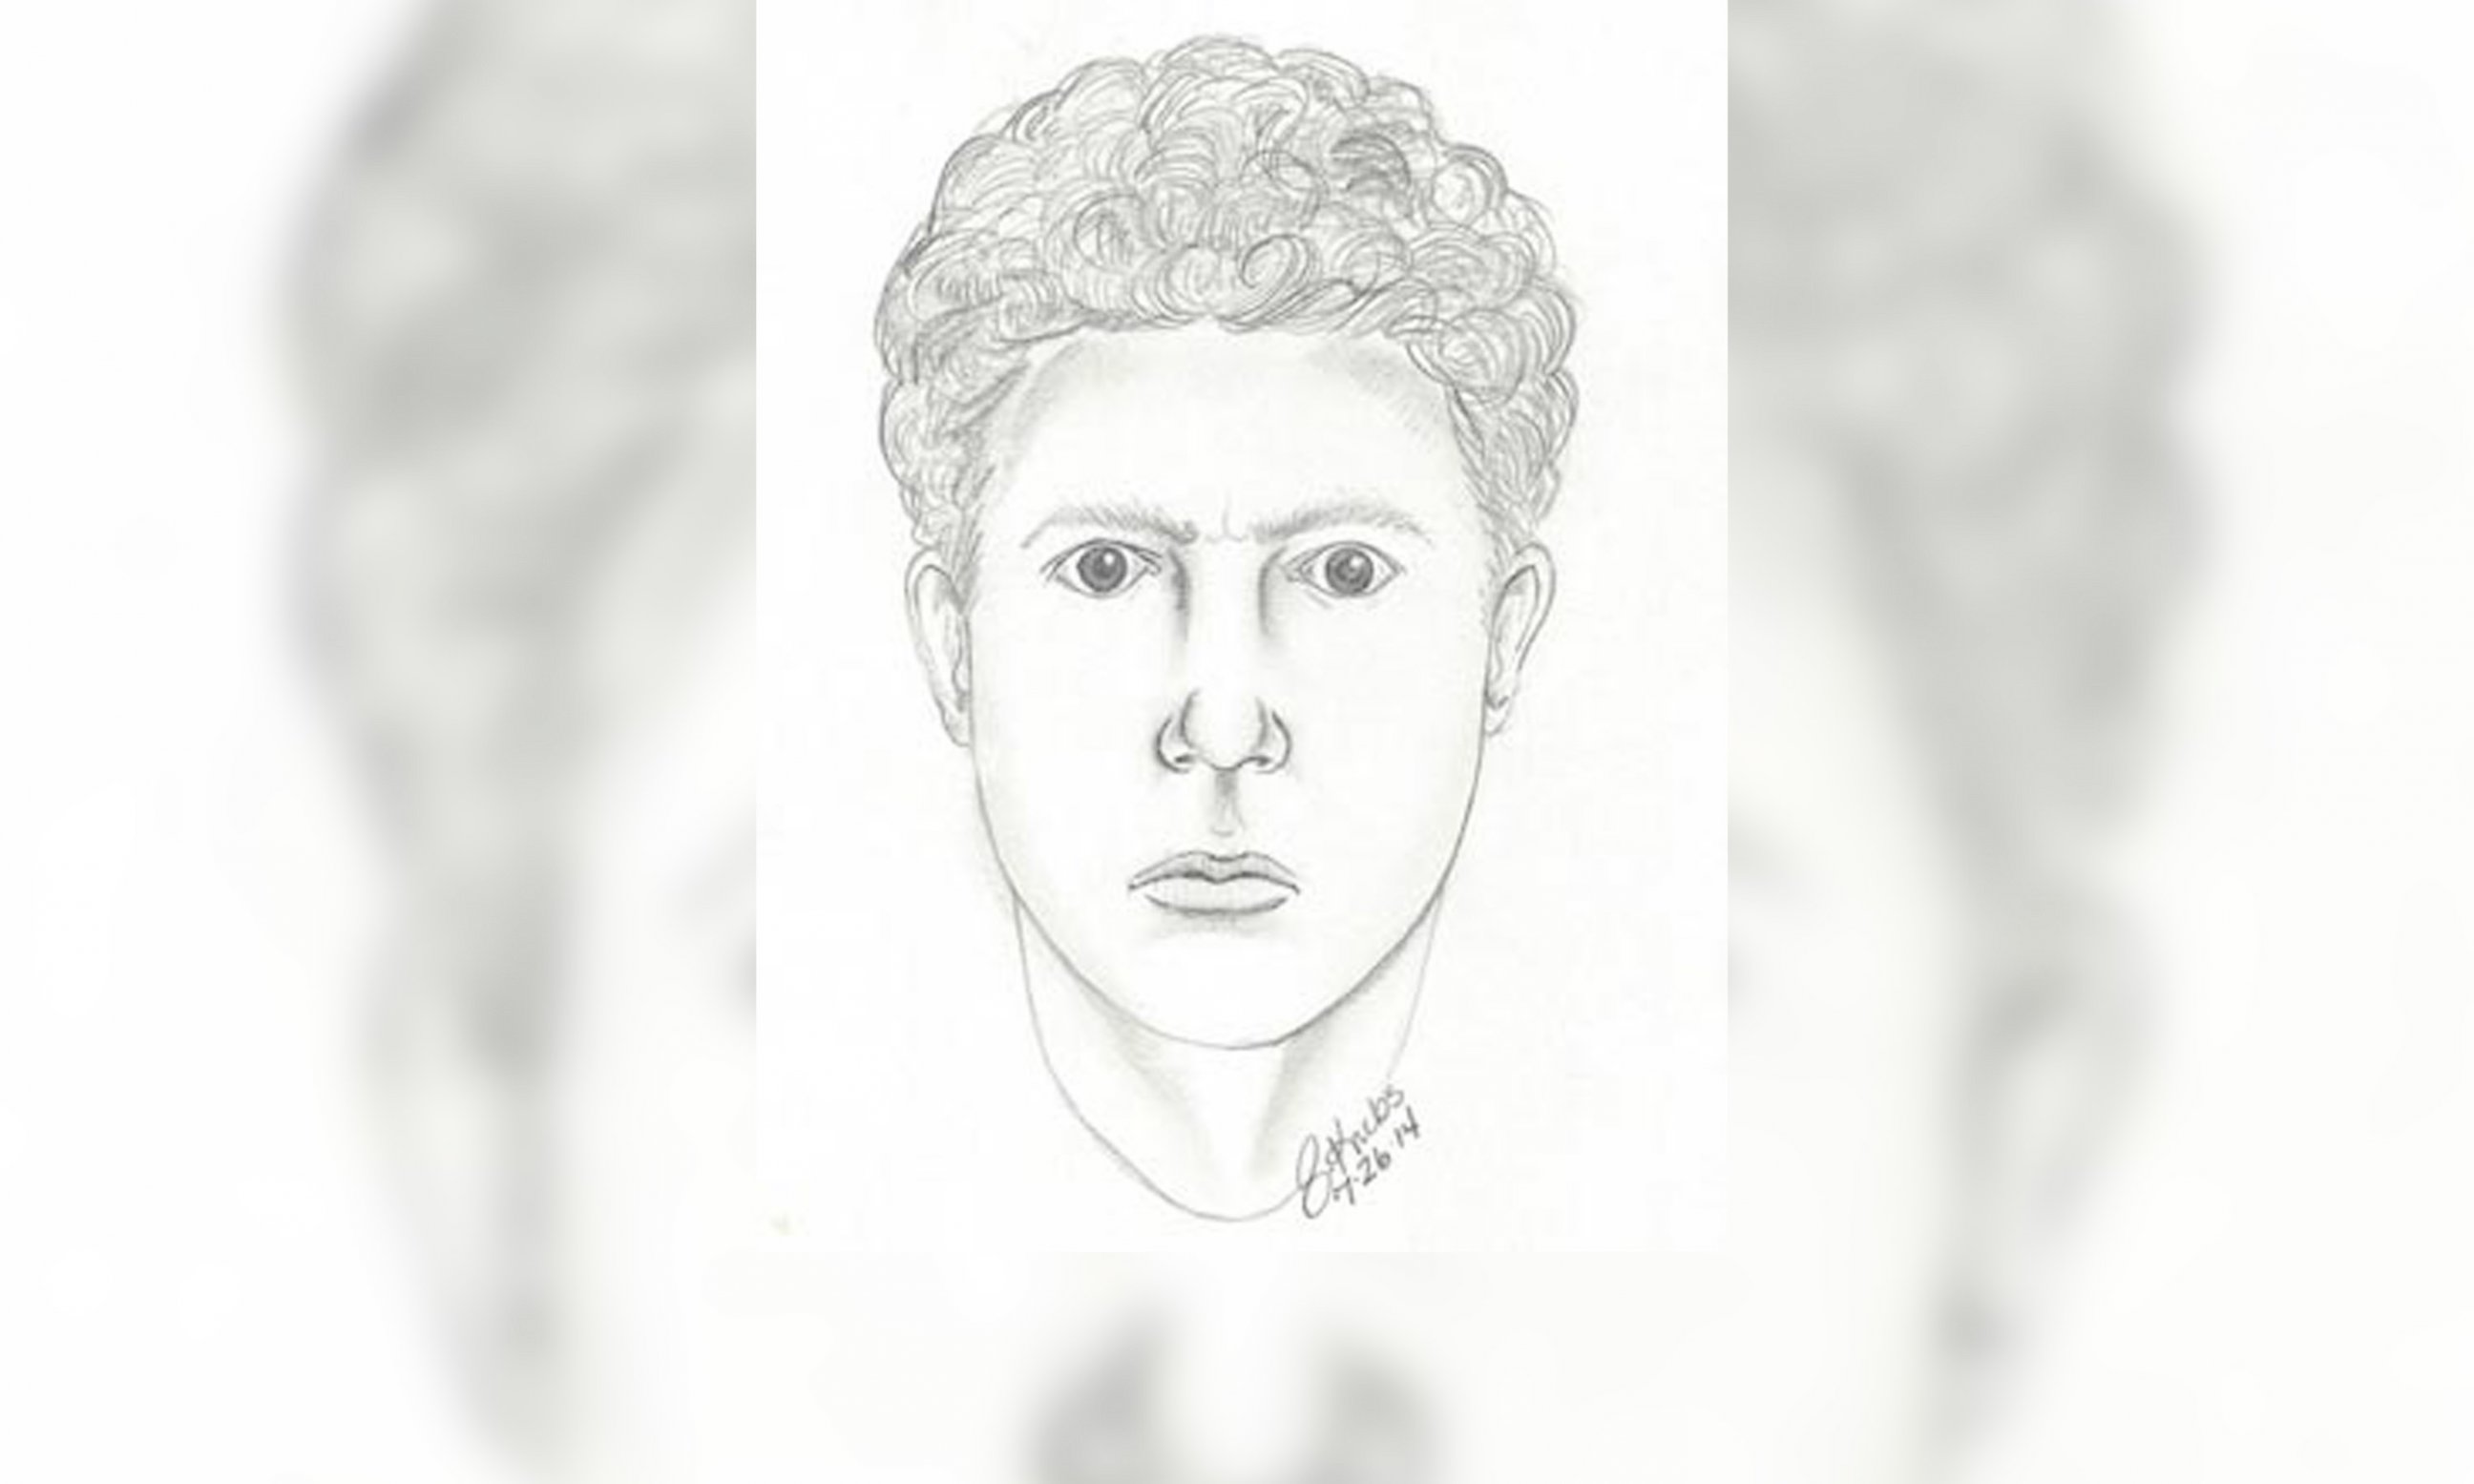 PHOTO: Michigan State Police released this drawing of a person of interest in their investigation into the July 24, 2014 death of April Millsap. 